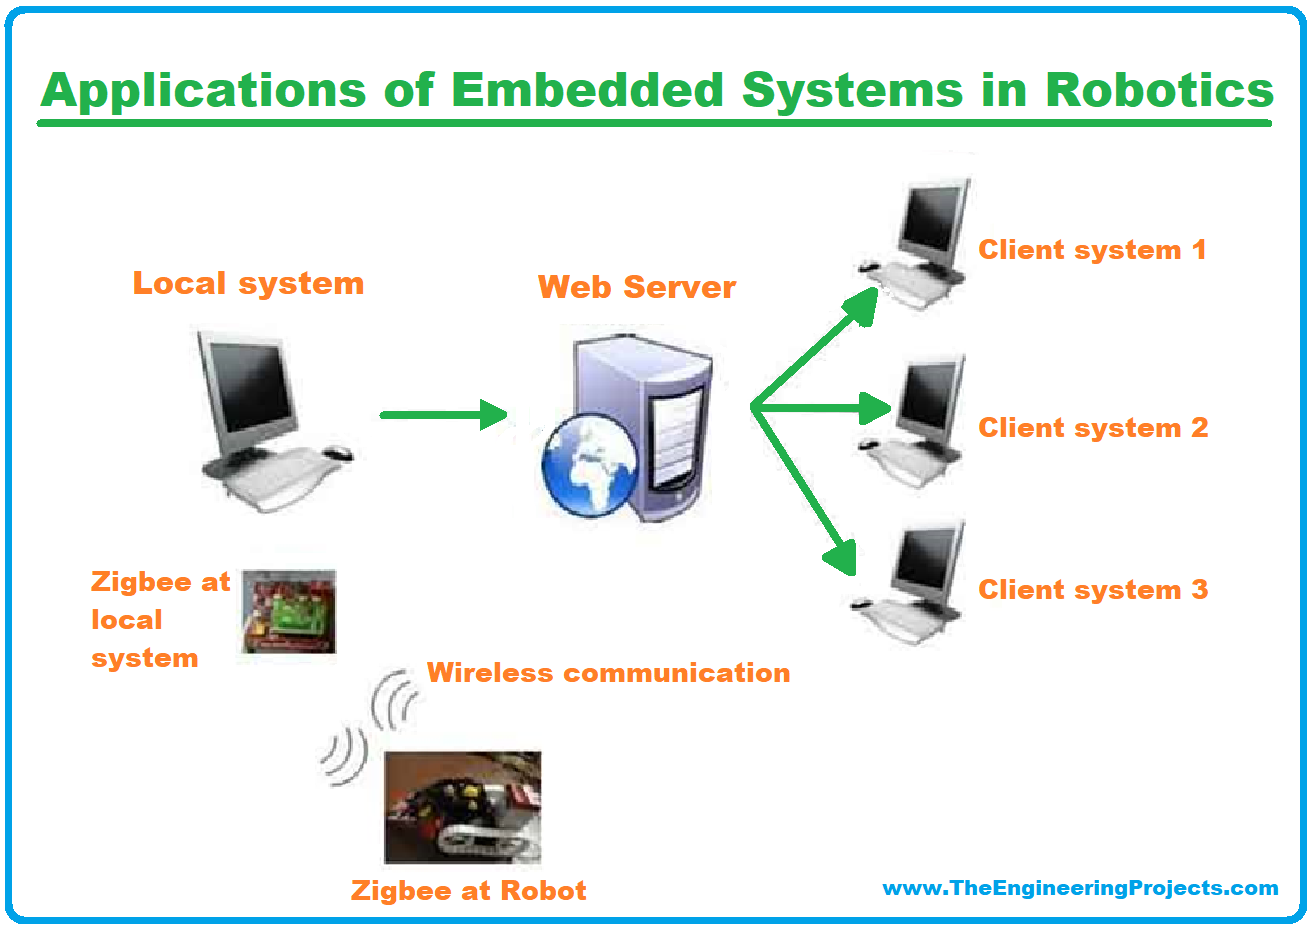 Applications of Embedded Systems, Applications of Embedded Systems in the Medical Field, Application of embedded systems in the Automotive Industry, Application of Embedded Systems in Telecommunications, Applications of Embedded Systems in Motes, Applications of Embedded Systems in Consumer Electronics, Applications of Embedded Systems in Avionics, Applications of Embedded Systems in Safety-Critical Systems, Application of Embedded Systems in Smart Cards, Applications of Embedded Systems in Robotics, Applications of Embedded Systems in Banking